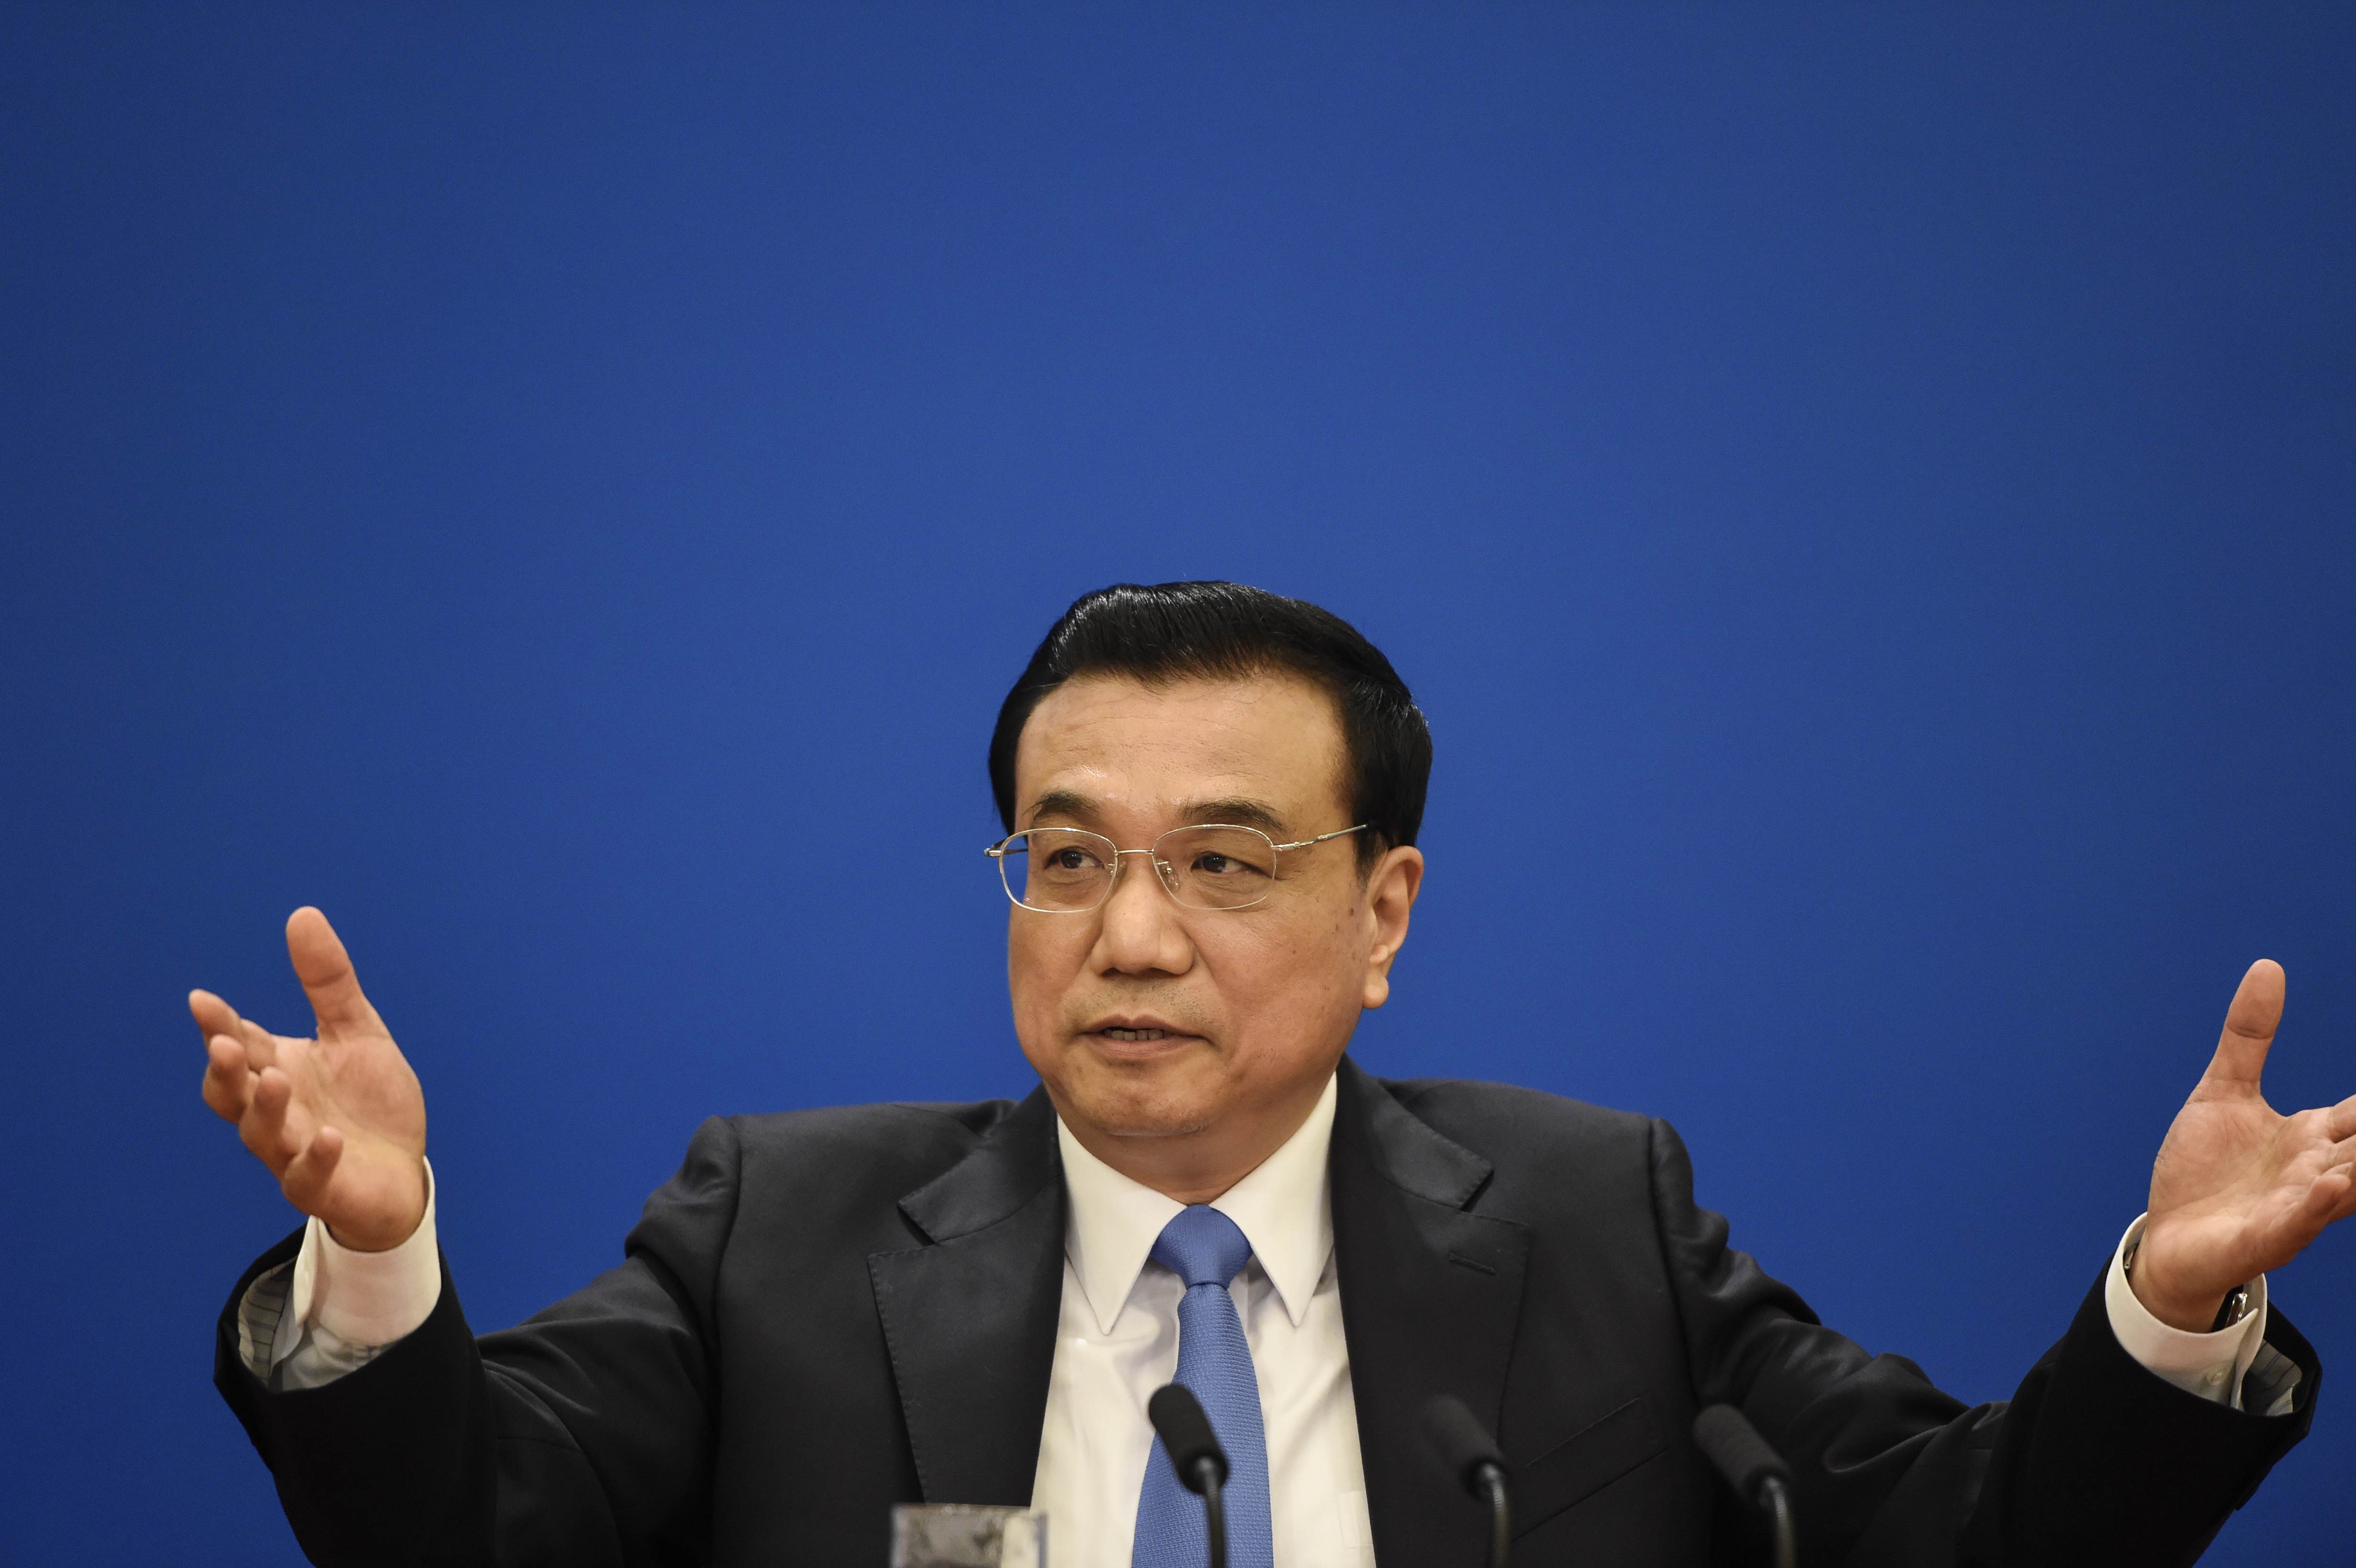 Chinese Premier Li Keqiang speaks during a press conference after the closing ceremony of the annual session of China's legislature, the National People's Congress, in Beijing's Great Hall of the People on March 15, 2015. Photo: AFP